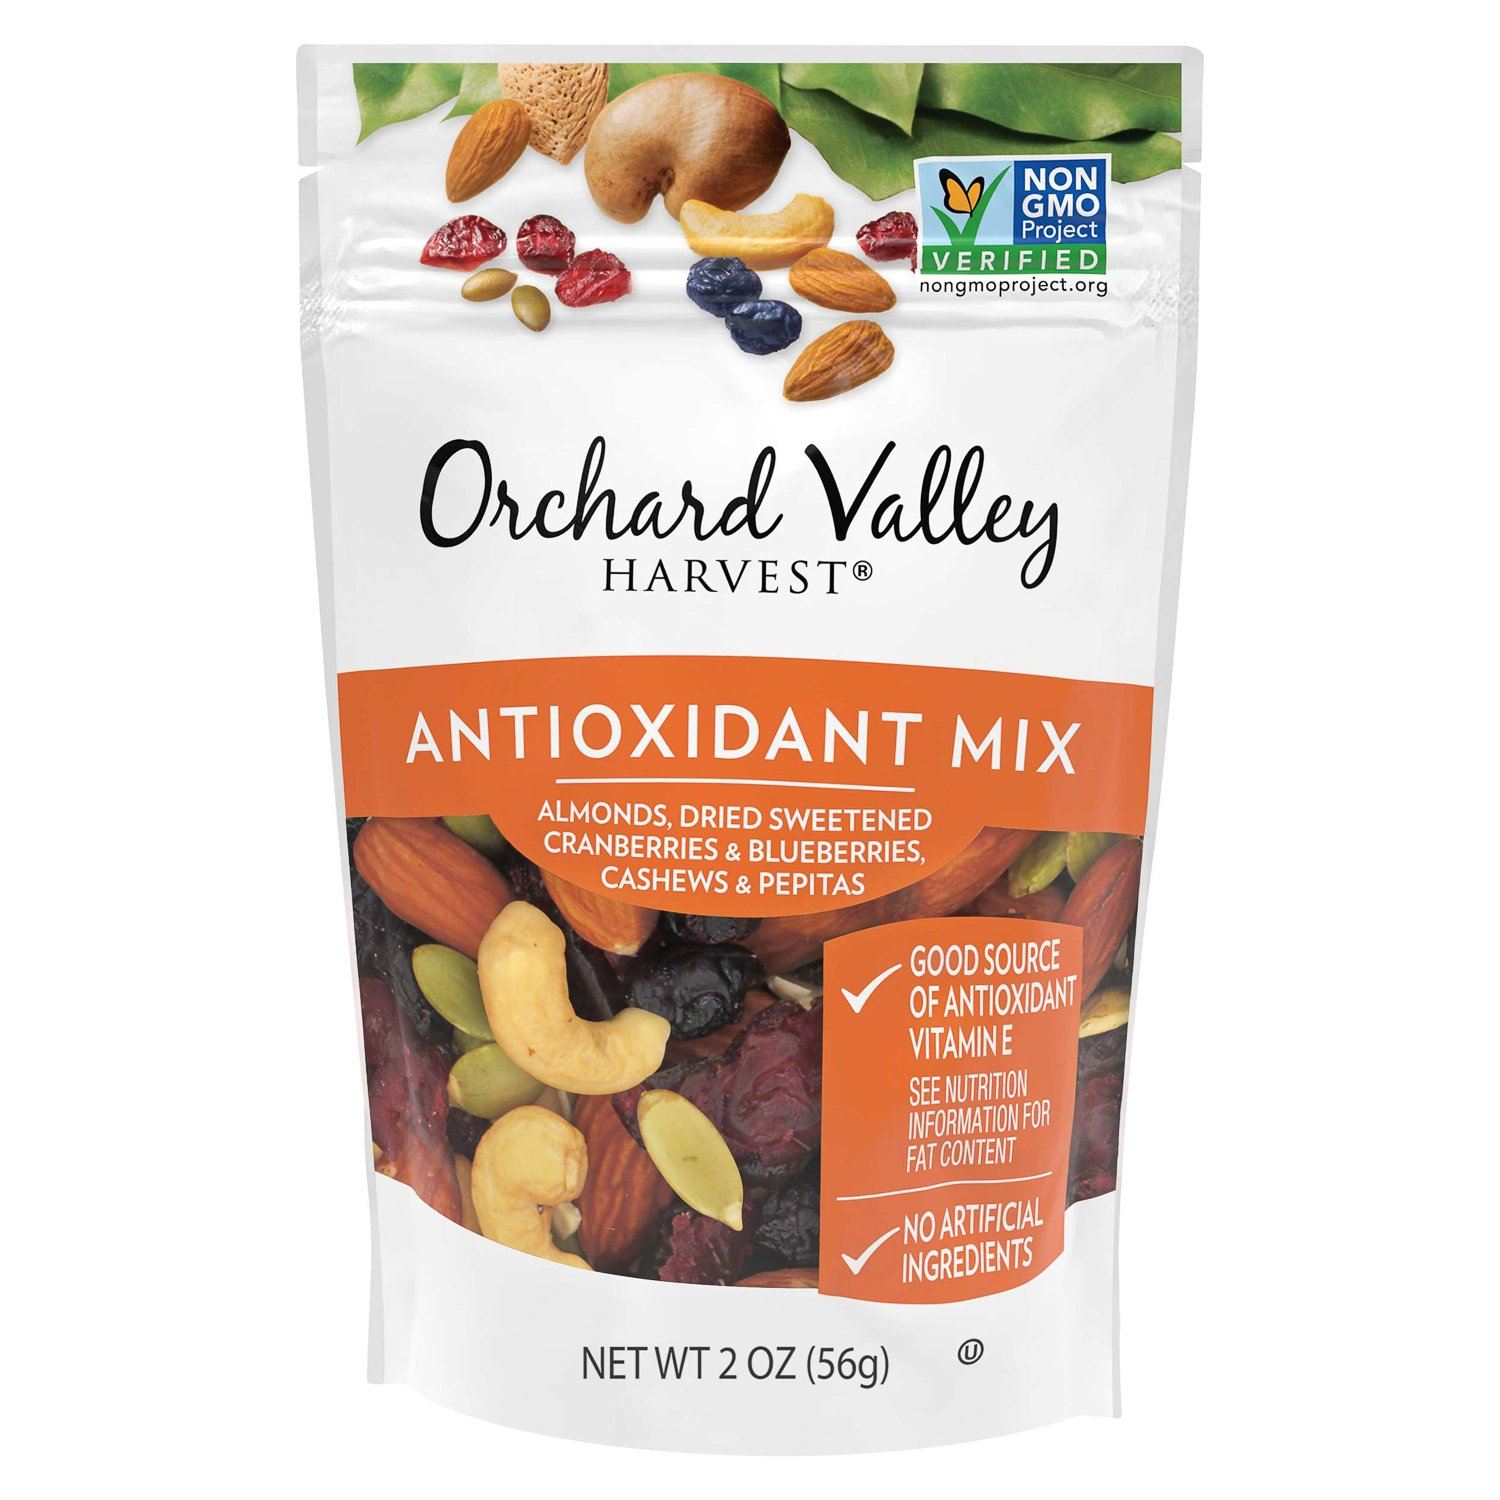 Orchard Valley Harvest Antioxidant Mix Orchard Valley Harvest Antioxidant Mix 2 Ounce 